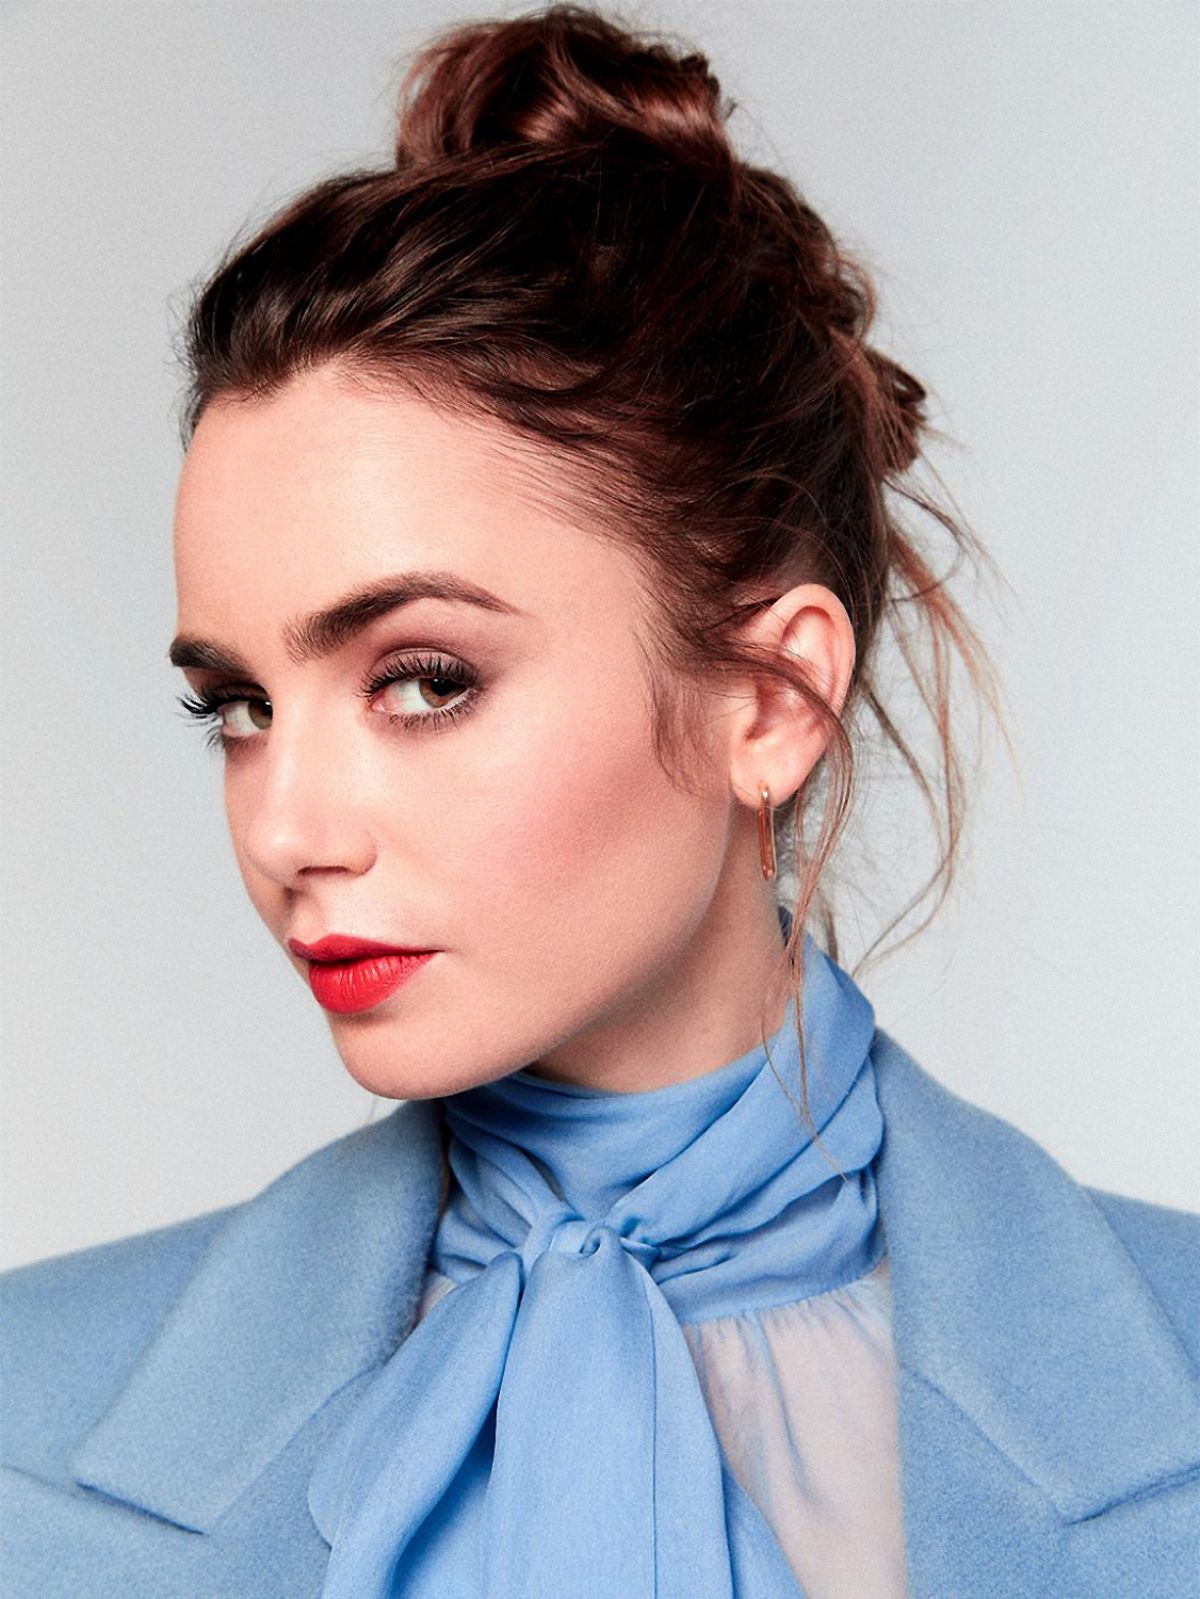 Happy Birthday to Lily Collins     Who is 32yo today! 
(2020, 2017, 2017, 2019) 